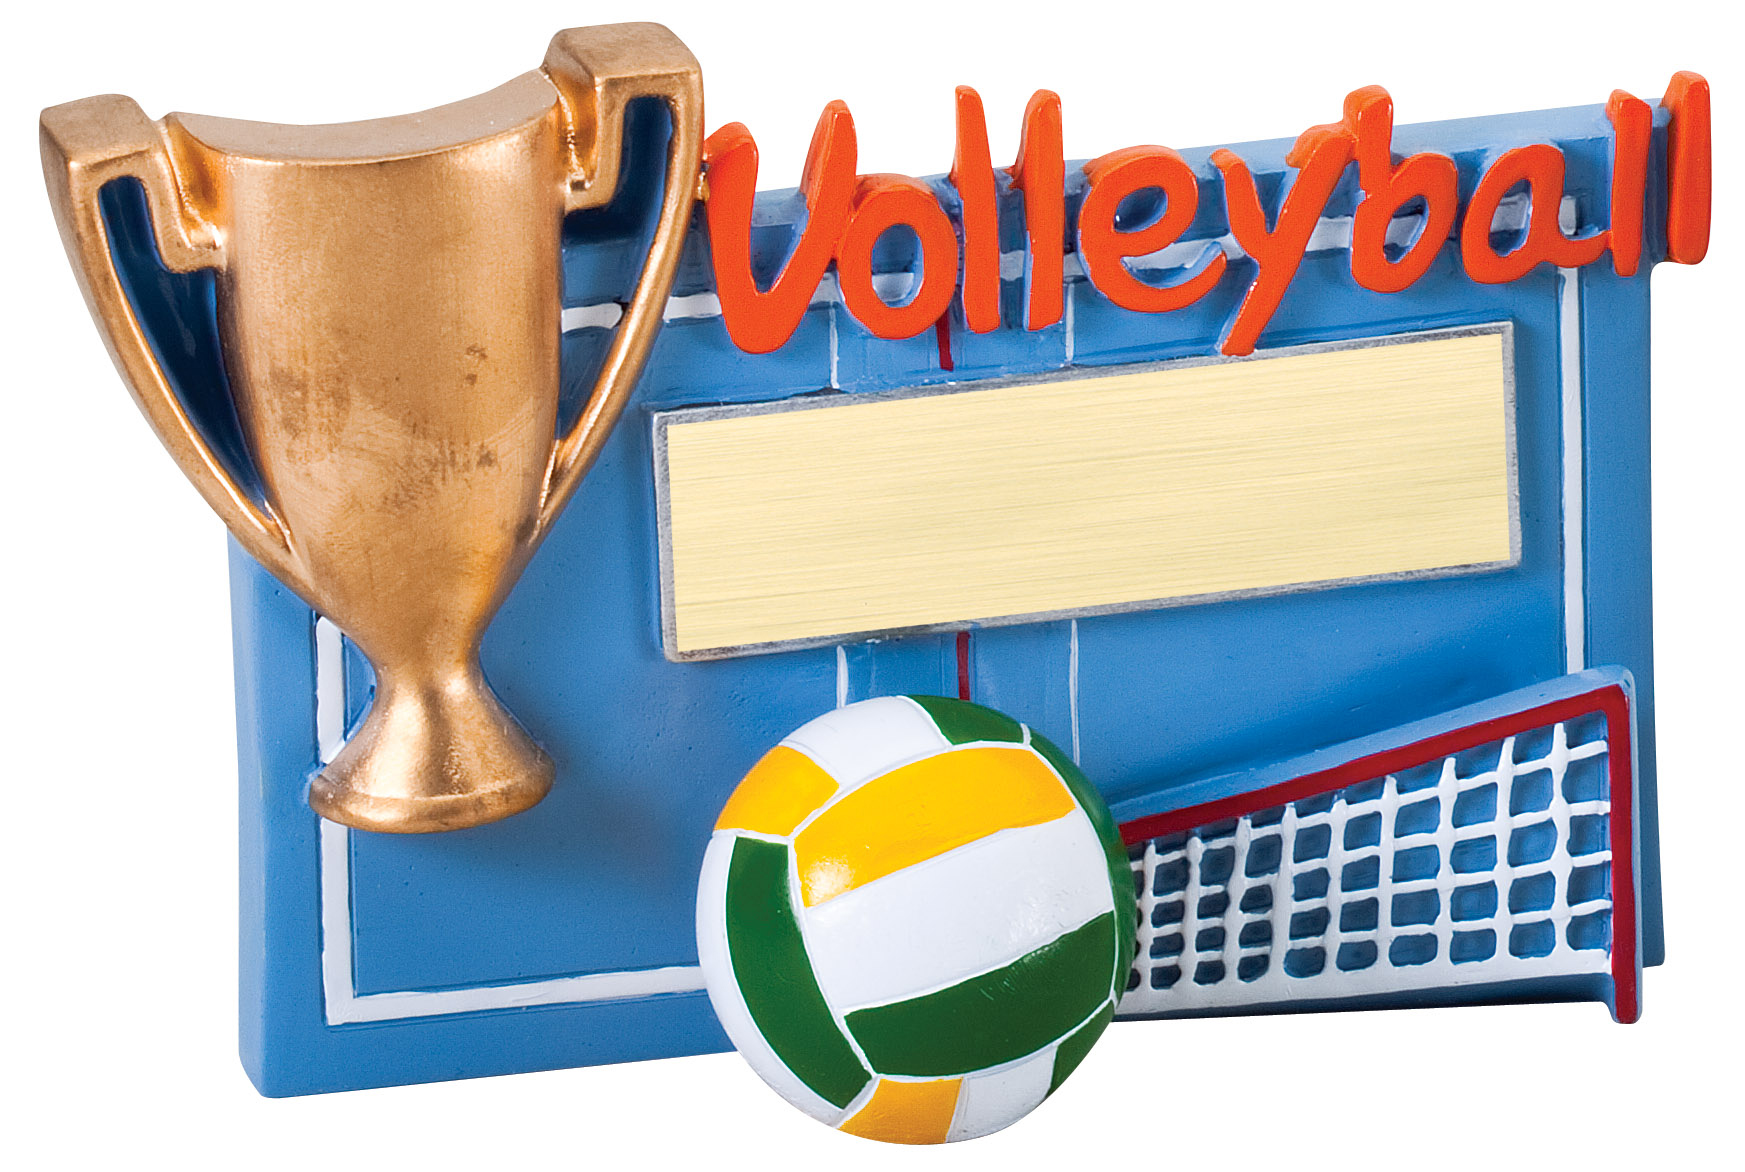 Volleyball Winners Cup Resin